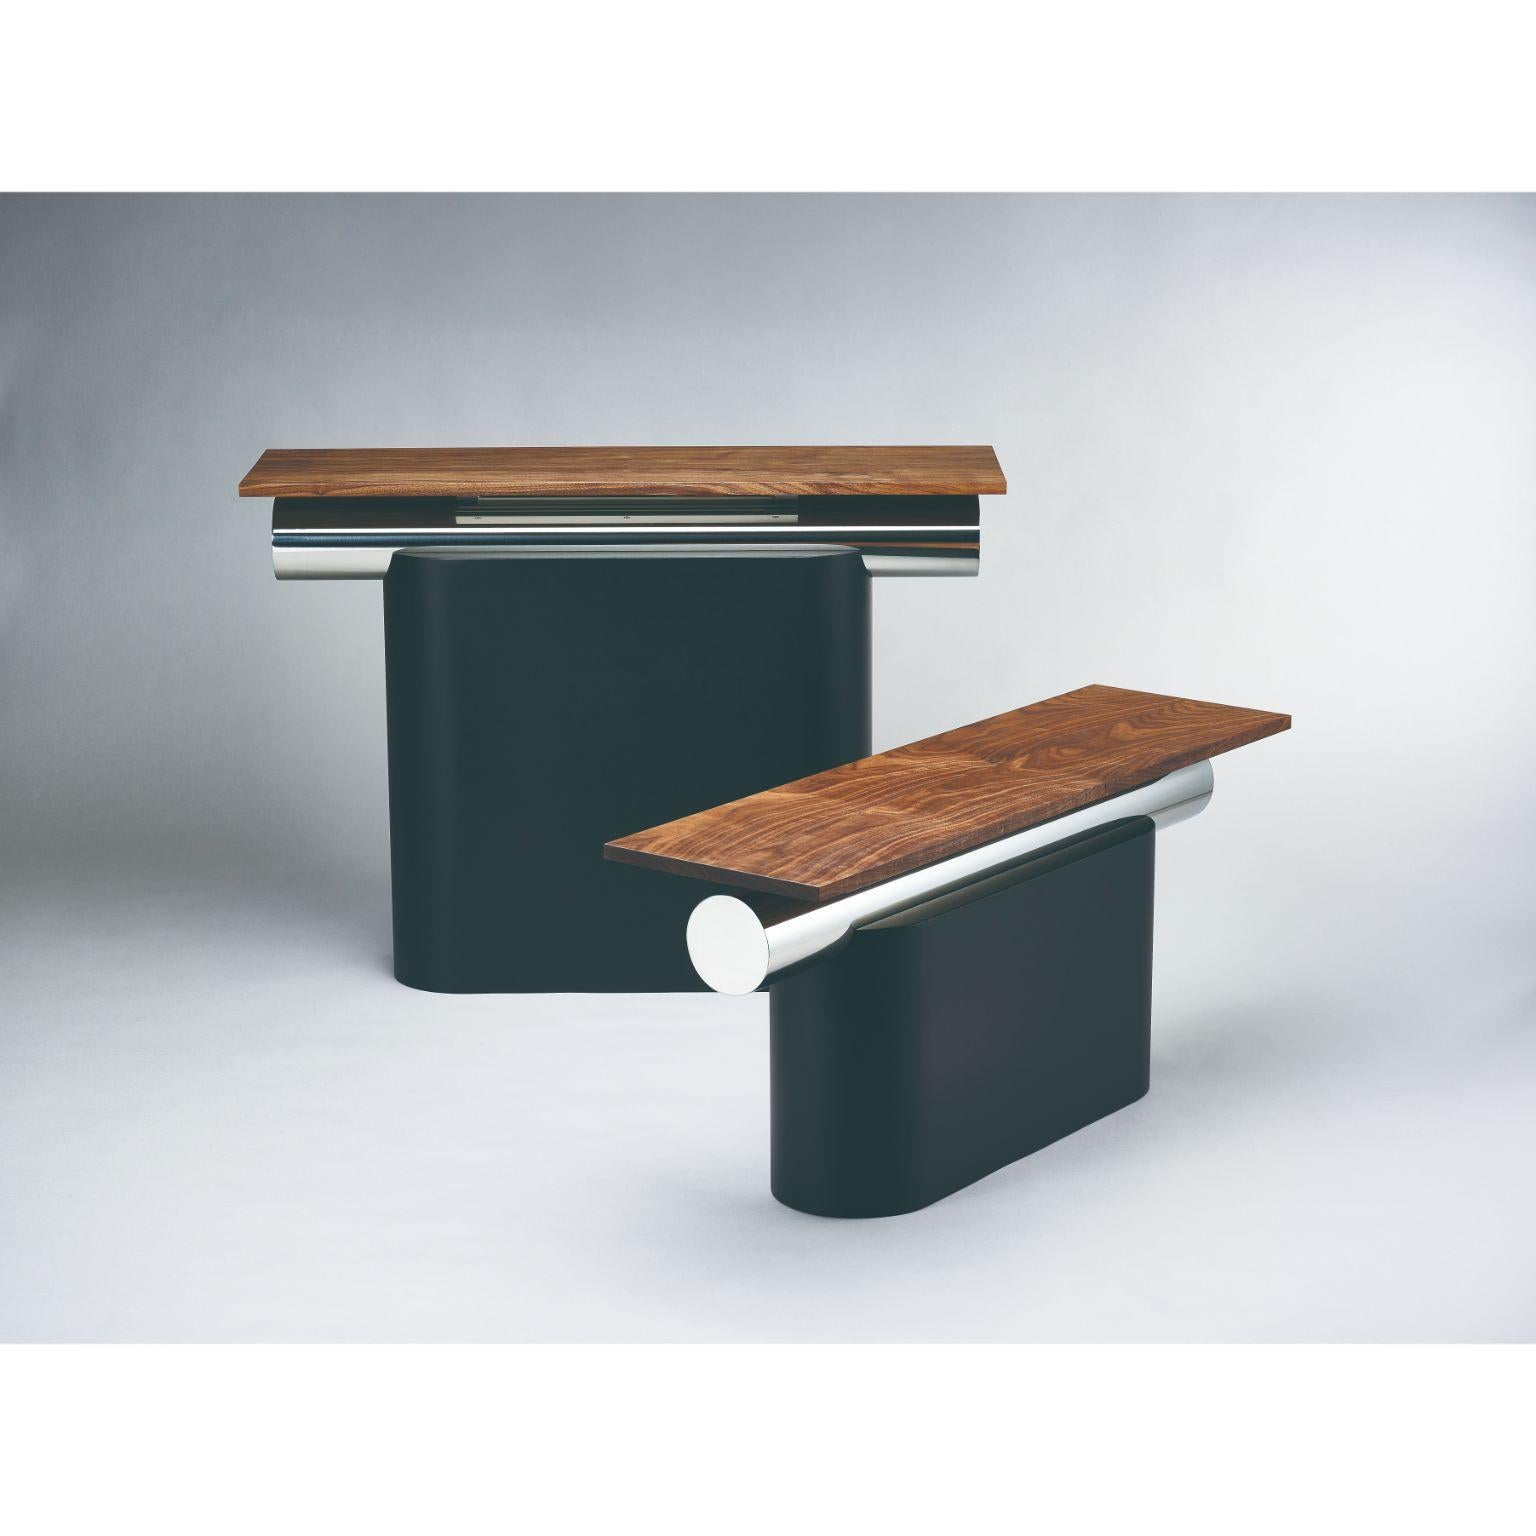 Set of 2 heritage layer side tables by Lee Jung Hoon
Dimensions: D 100 x W 29.4 x H 71cm / D 100 x W 29.4 x H 45cm
Materials: Walnut, stainless steel, steel.
Also available in different dimension.

The Heritage series, created by designer Lee